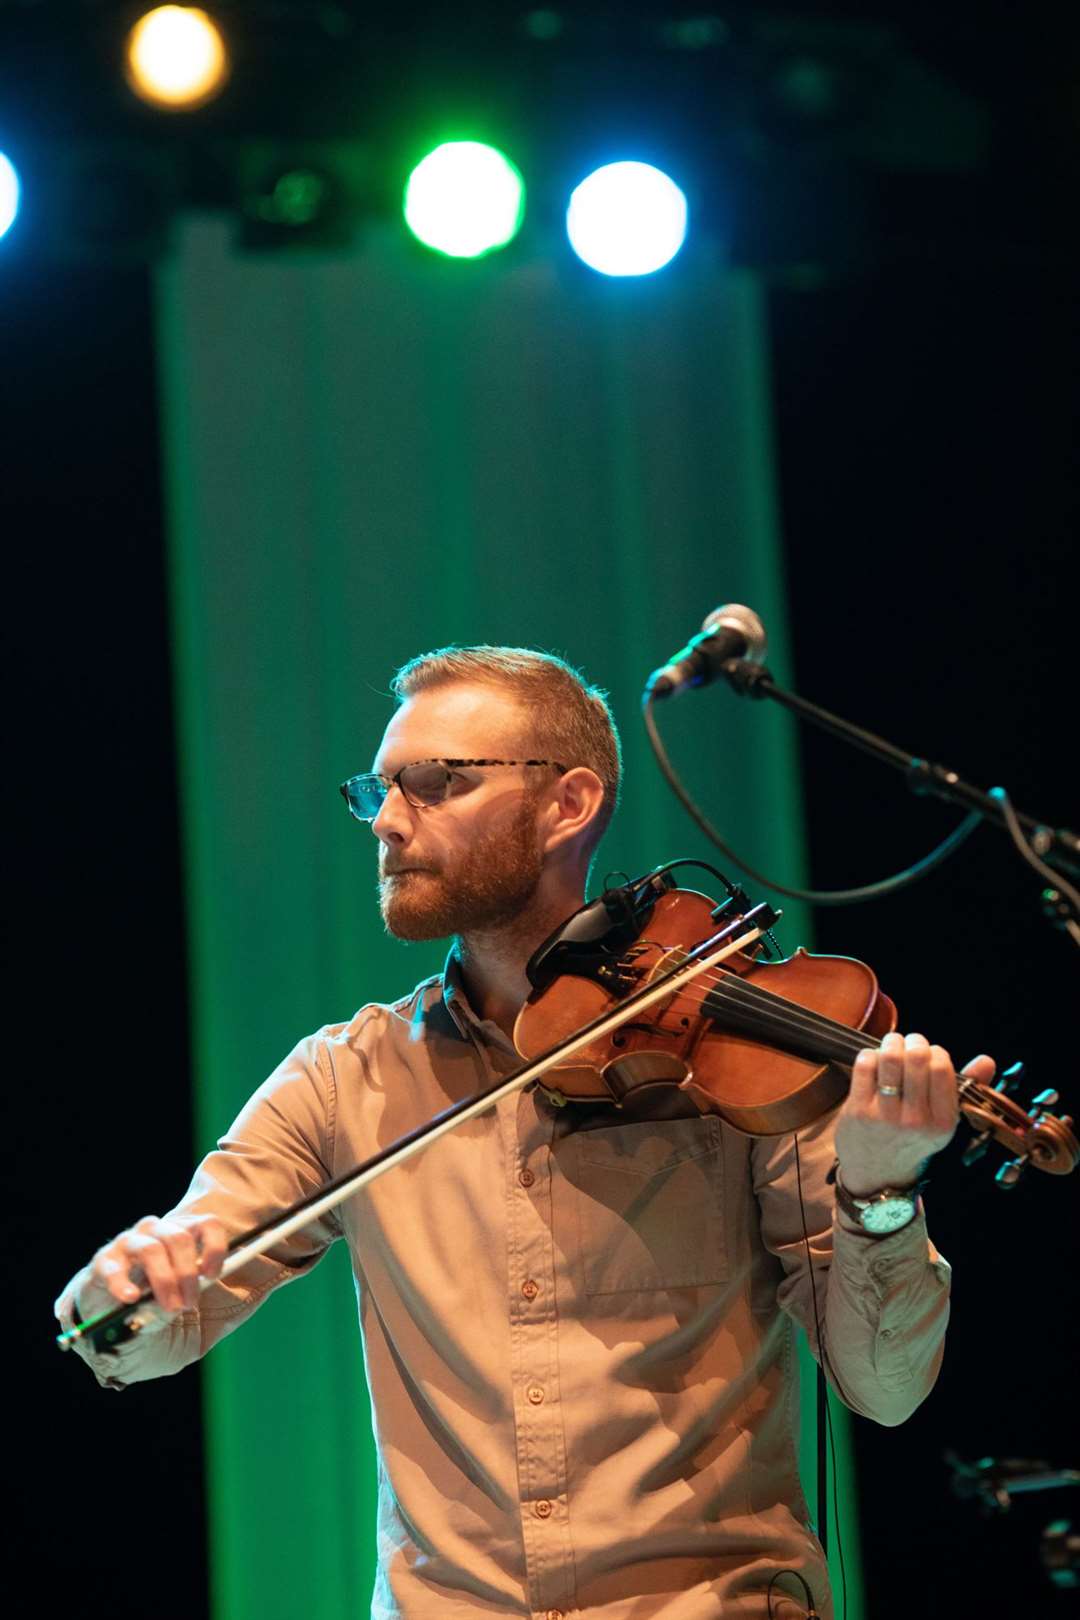 New Glasgow traditional music outfit, Staran, open The Royal National Mòd 2021 in Inverness with a live performance at Eden Court Theatre, Jack Smedley plays fiddle on stage